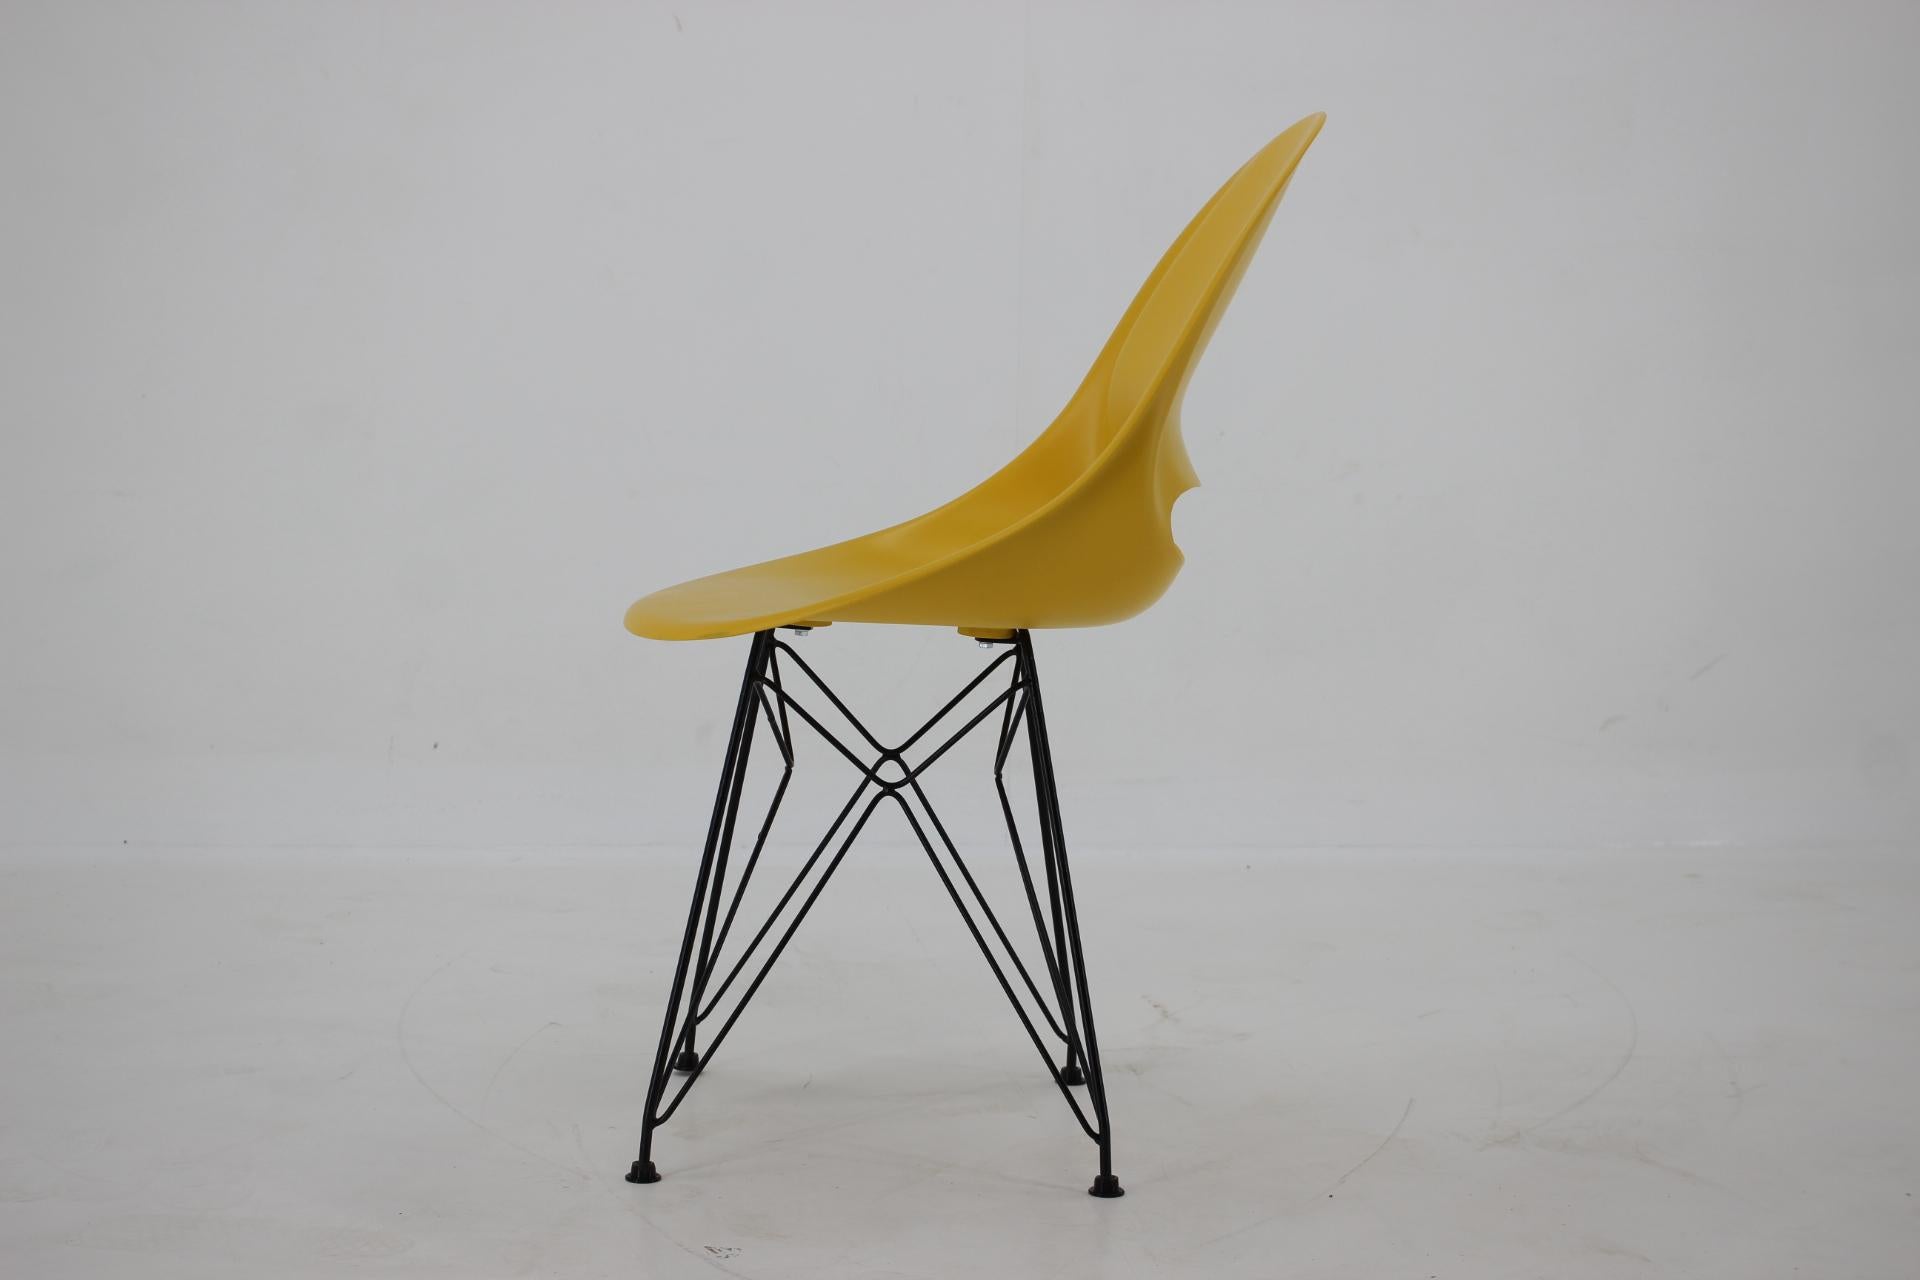 Set of 4 Midcentury Yellow Design Fiberglass Dining Chairs by M.Navratil, 1960s For Sale 3